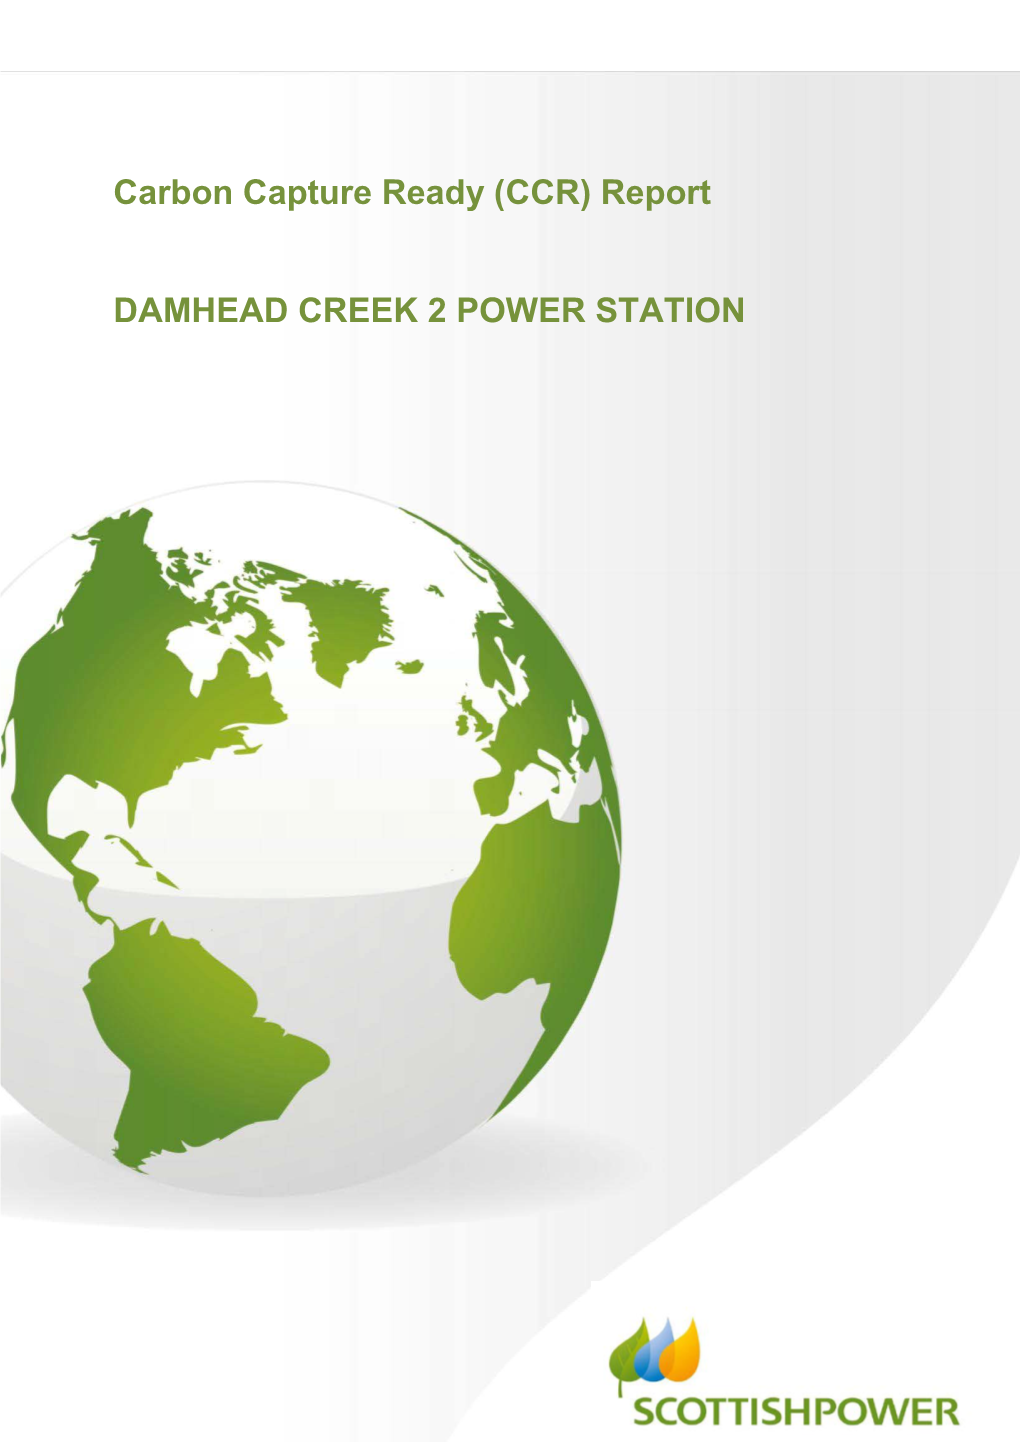 Carbon Capture Ready (CCR) Report DAMHEAD CREEK 2 POWER